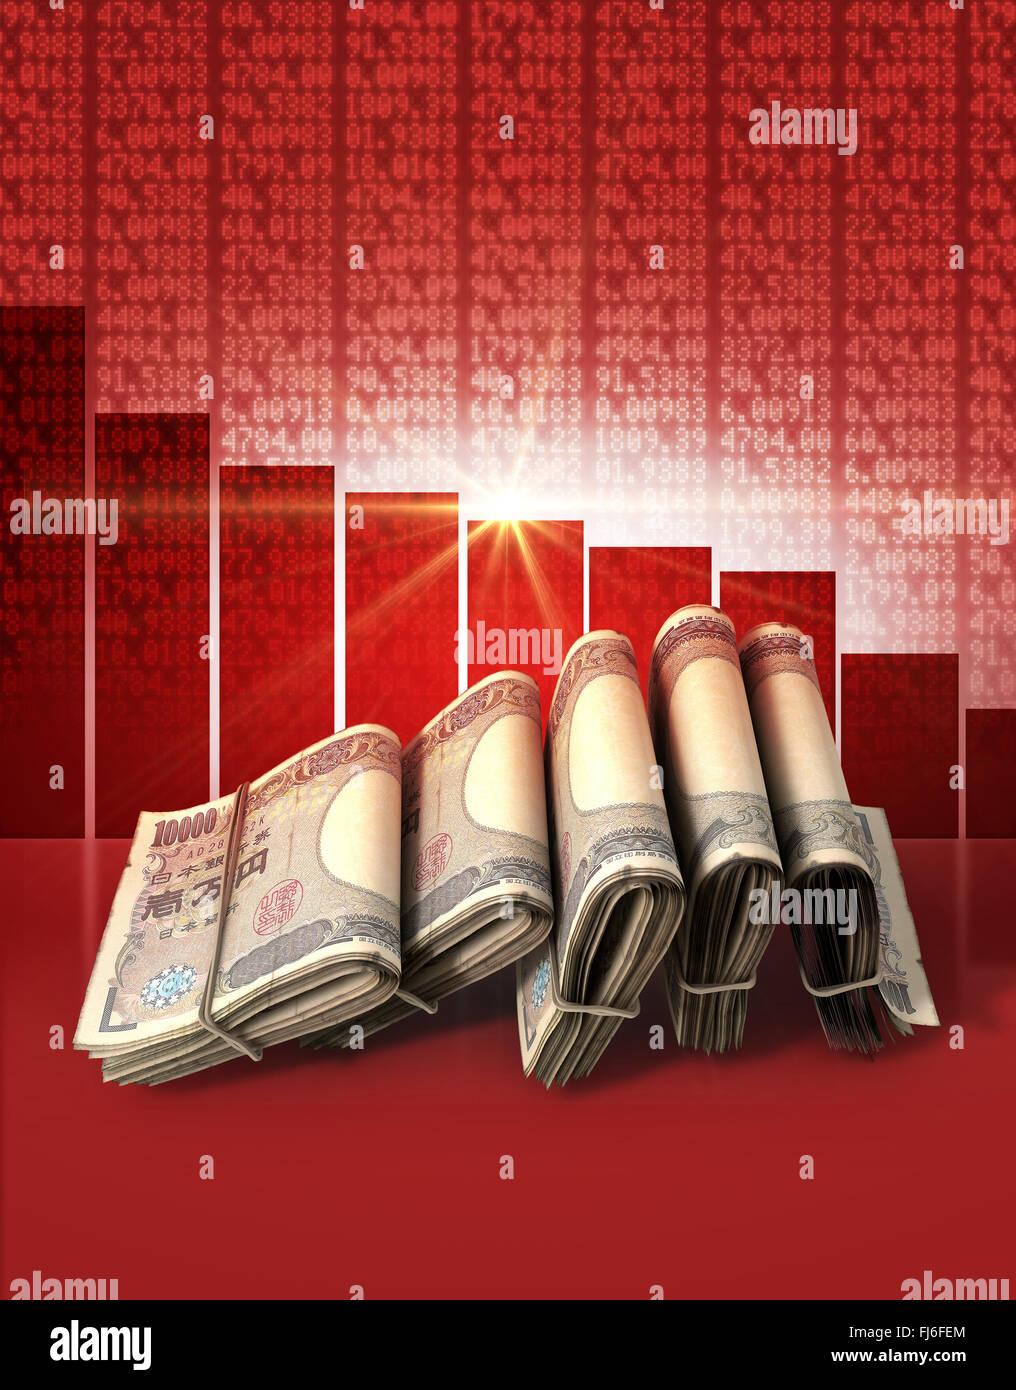 Wads of folded stacks of japanese yen banknotes on a red digital stock market indicator board background with a decreasing red b Stock Photo